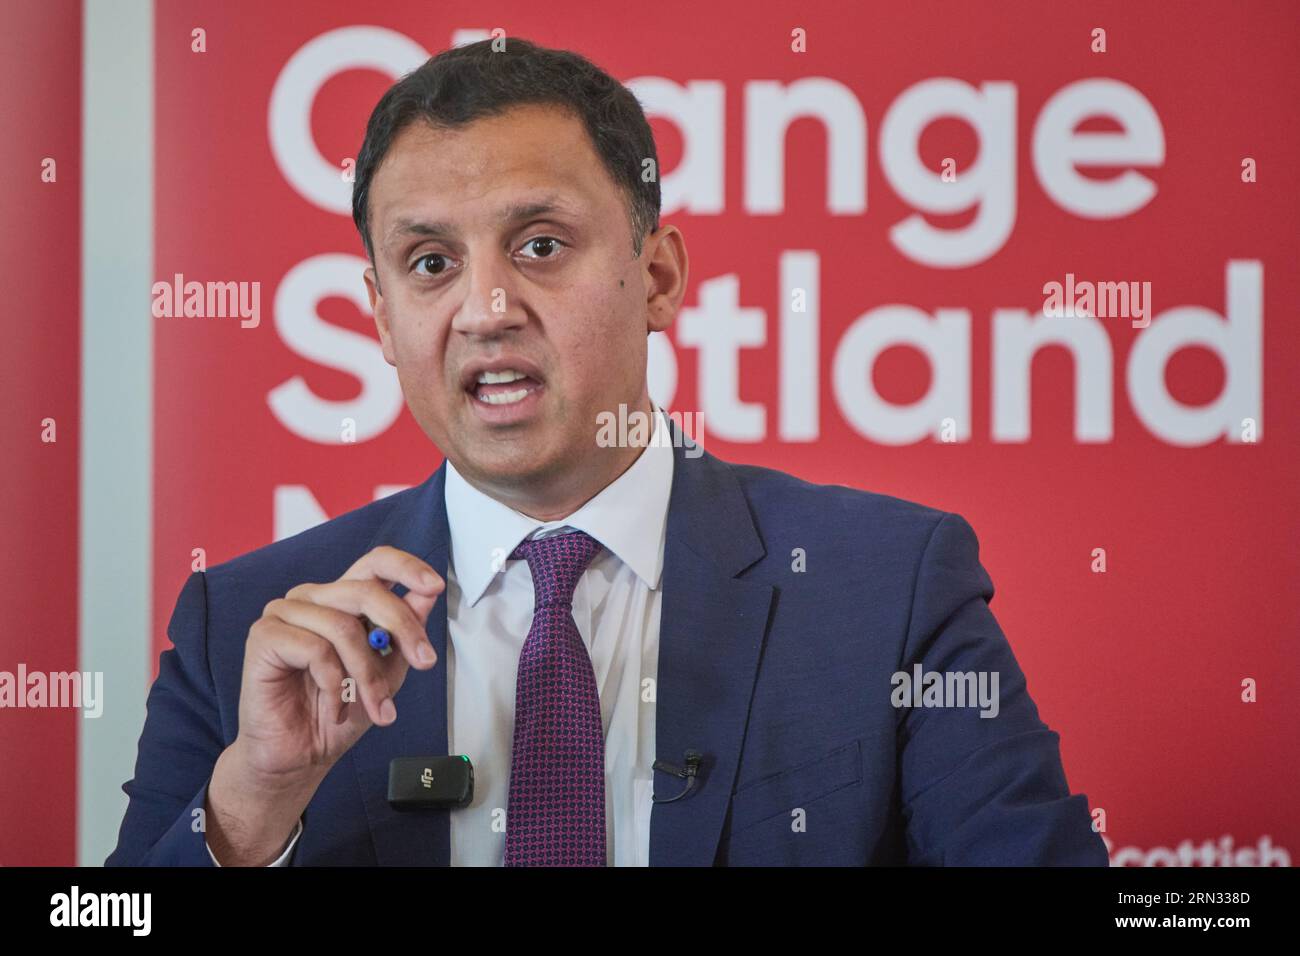 Glasgow Scotland, UK 31 August 2023. Scottish Labour Leader Anas Sarwar at the The Trade Halls speaks with business leaders from across Scotland on economic growth. credit sst/alamy live news Stock Photo